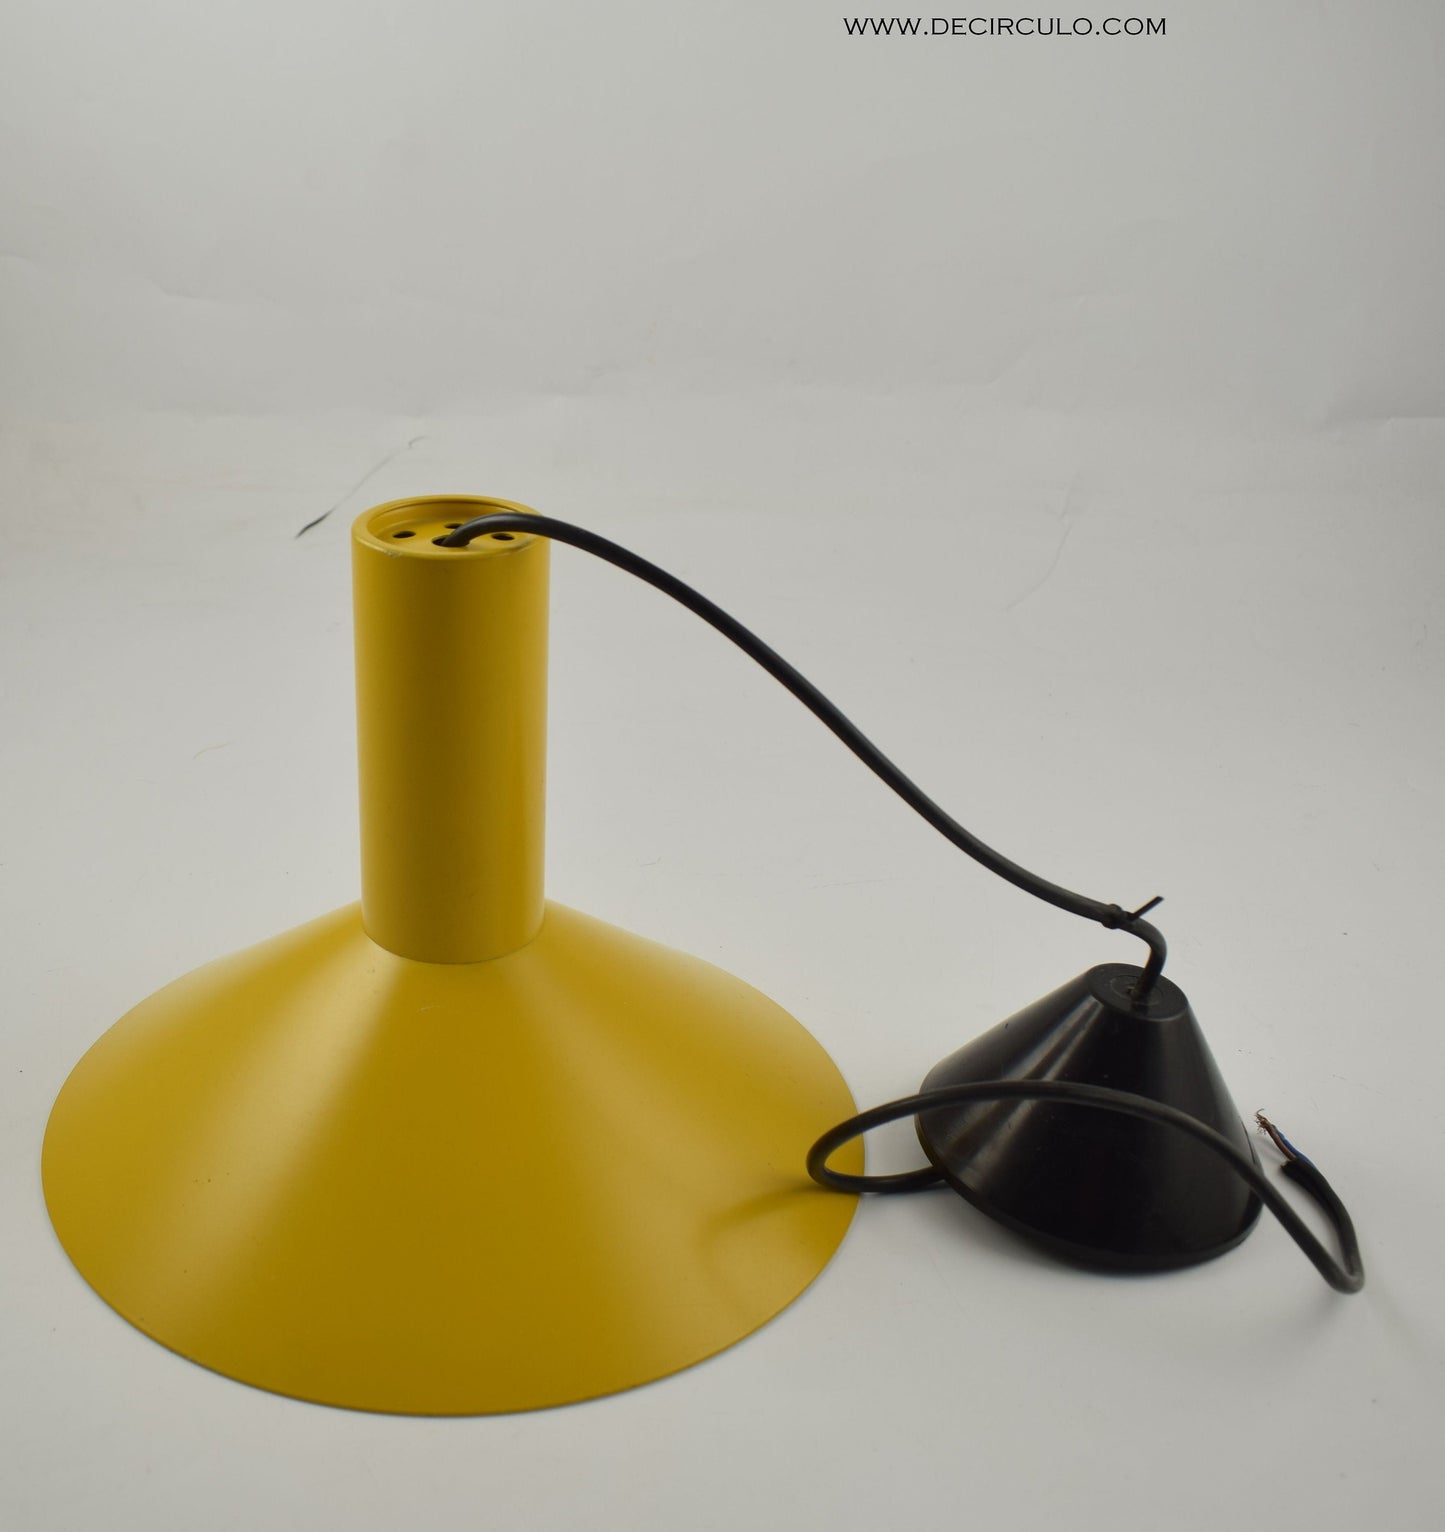 Fog and Morup Formel 1 yellow pendant lamp designed by Hans Due, Denmark 1975.